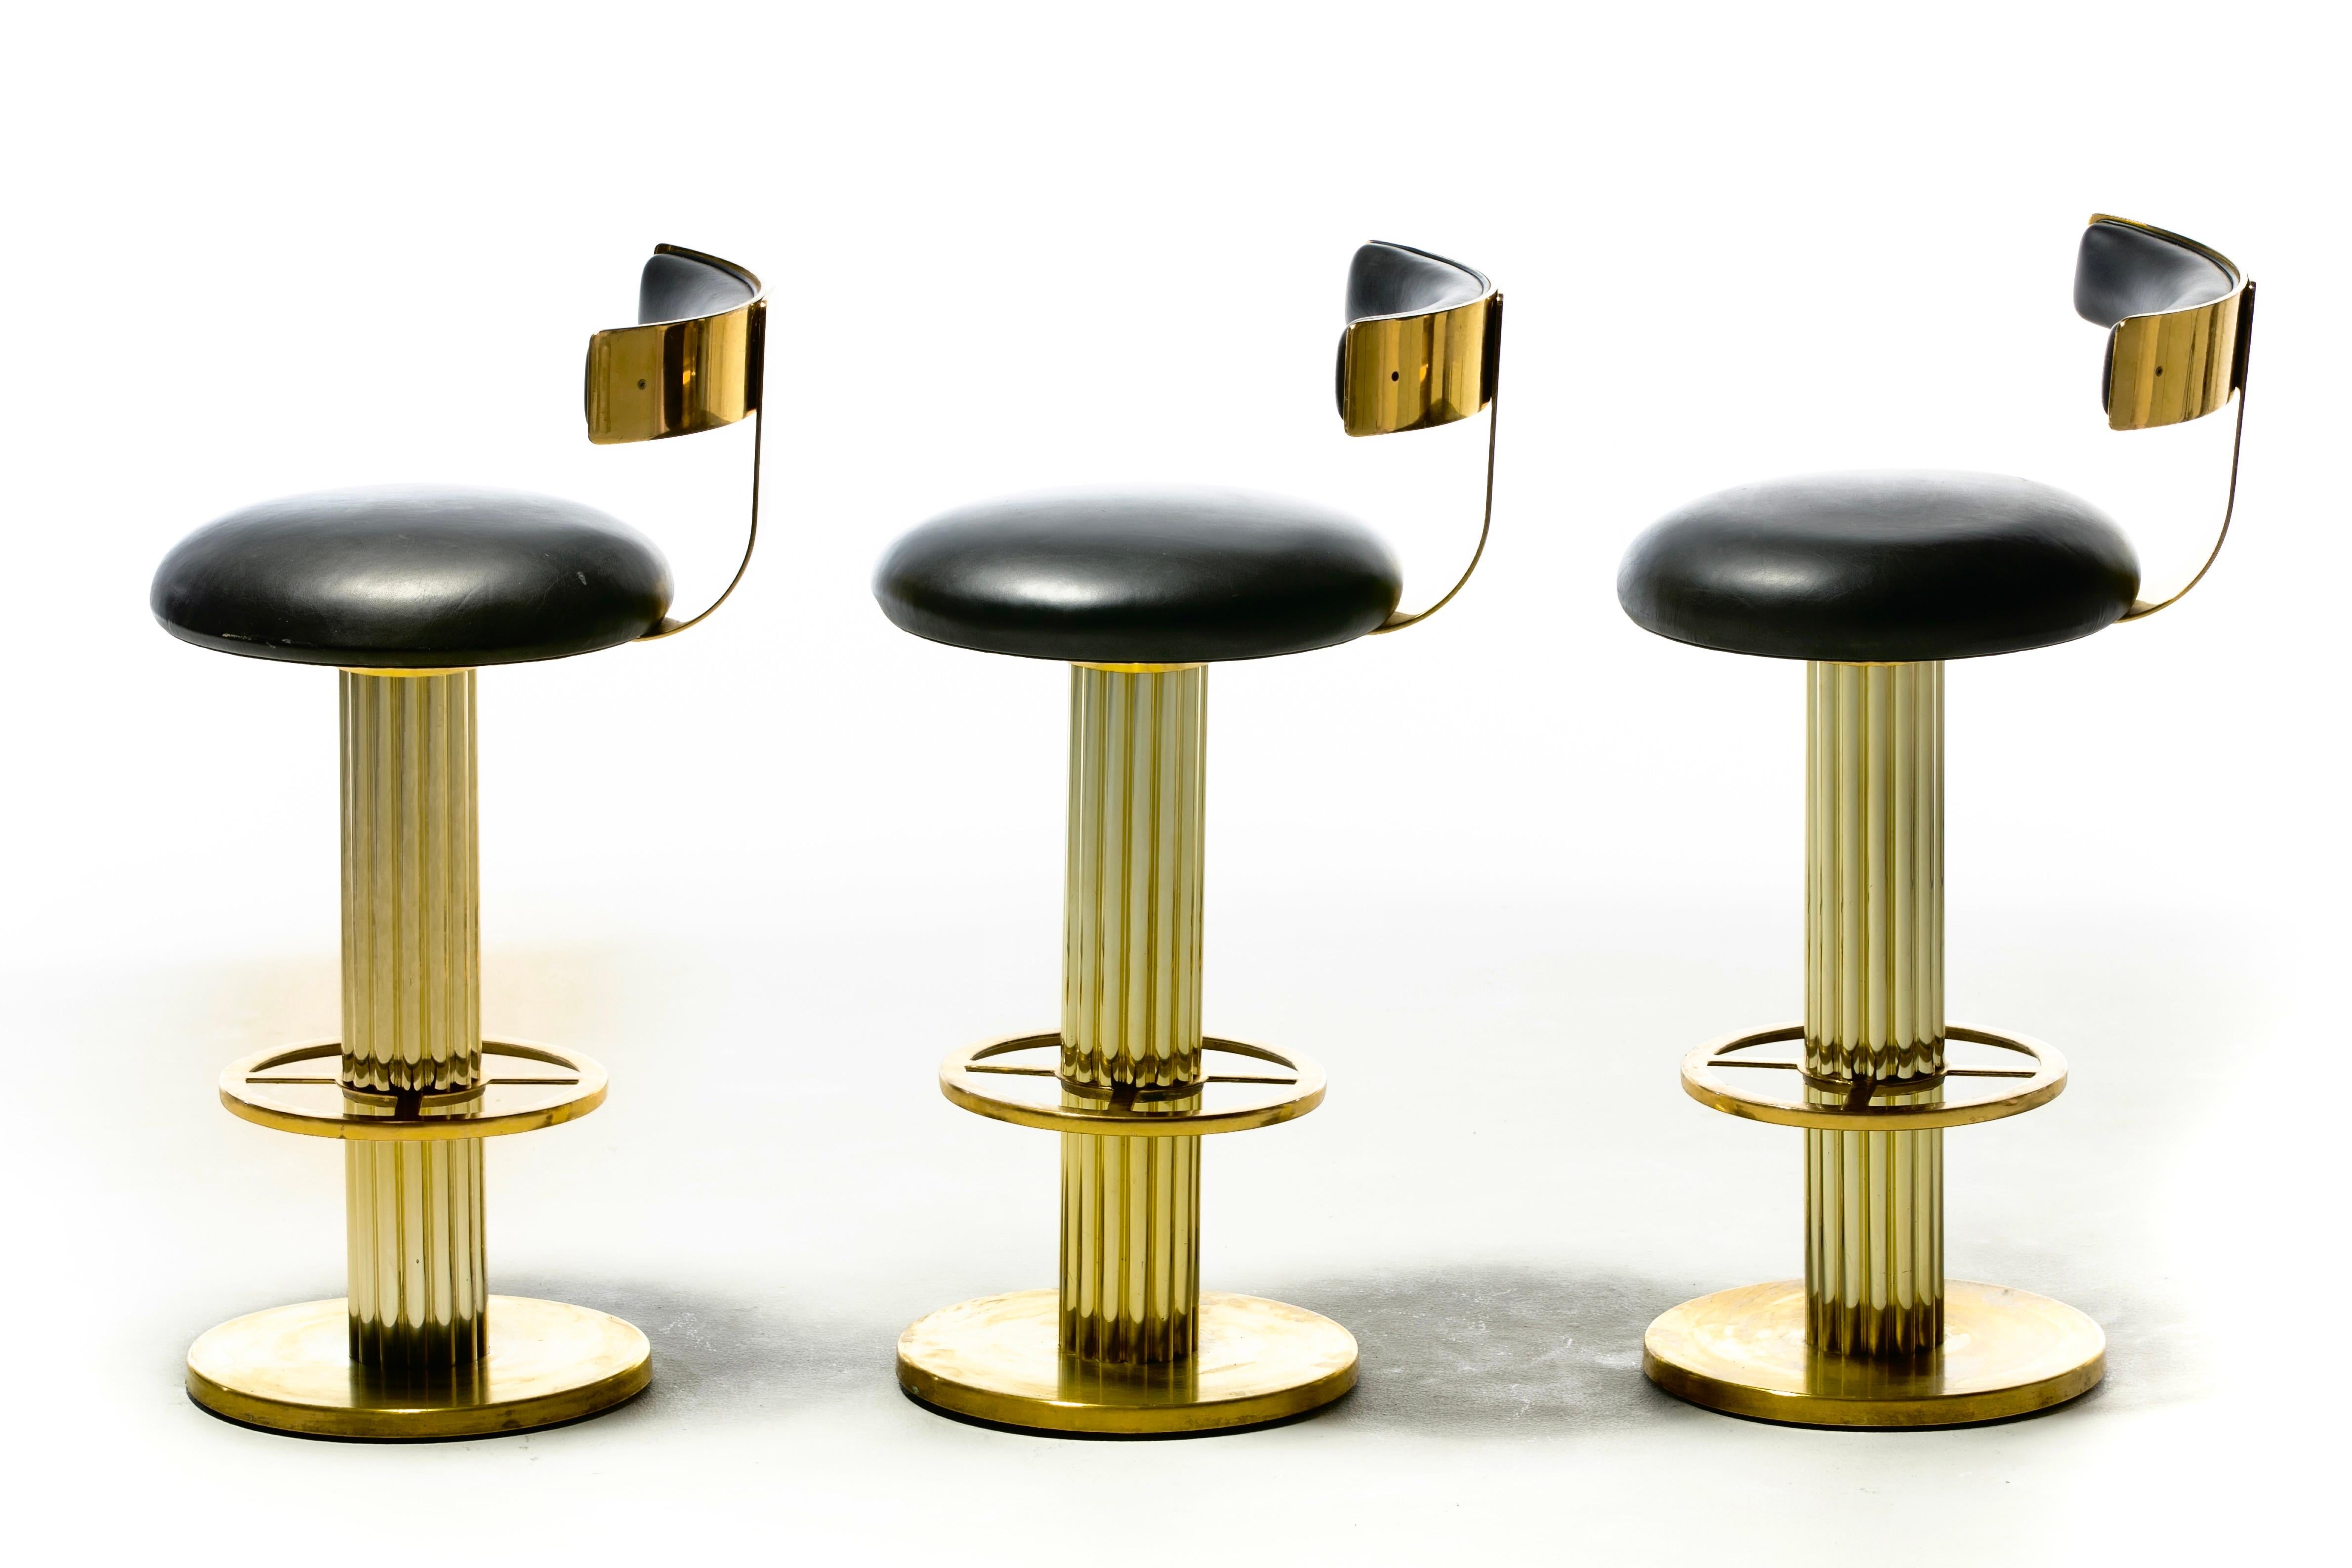 If you're in the market for the Rolls-Royce of Bar Stools, this high quality set of Post Modern Art Deco Revival Design for Leisure Bar Stools are it. Commonly found in yachts and only the most luxurious residences all over the world, Design for